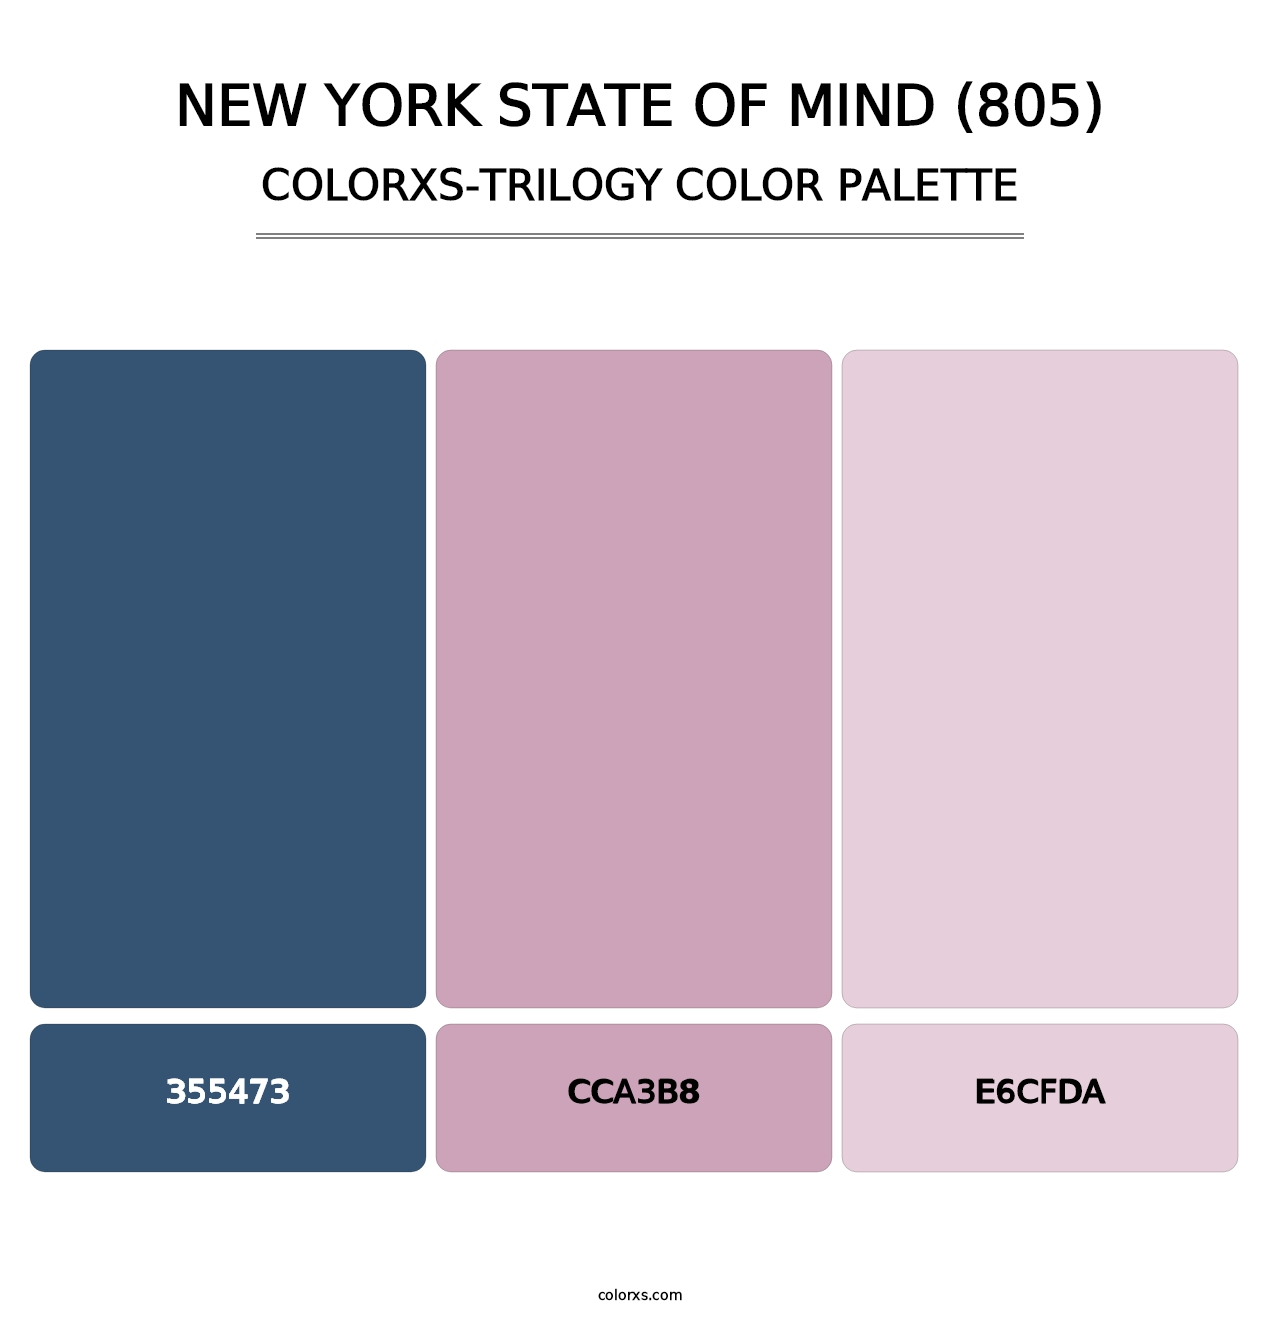 New York State of Mind (805) - Colorxs Trilogy Palette